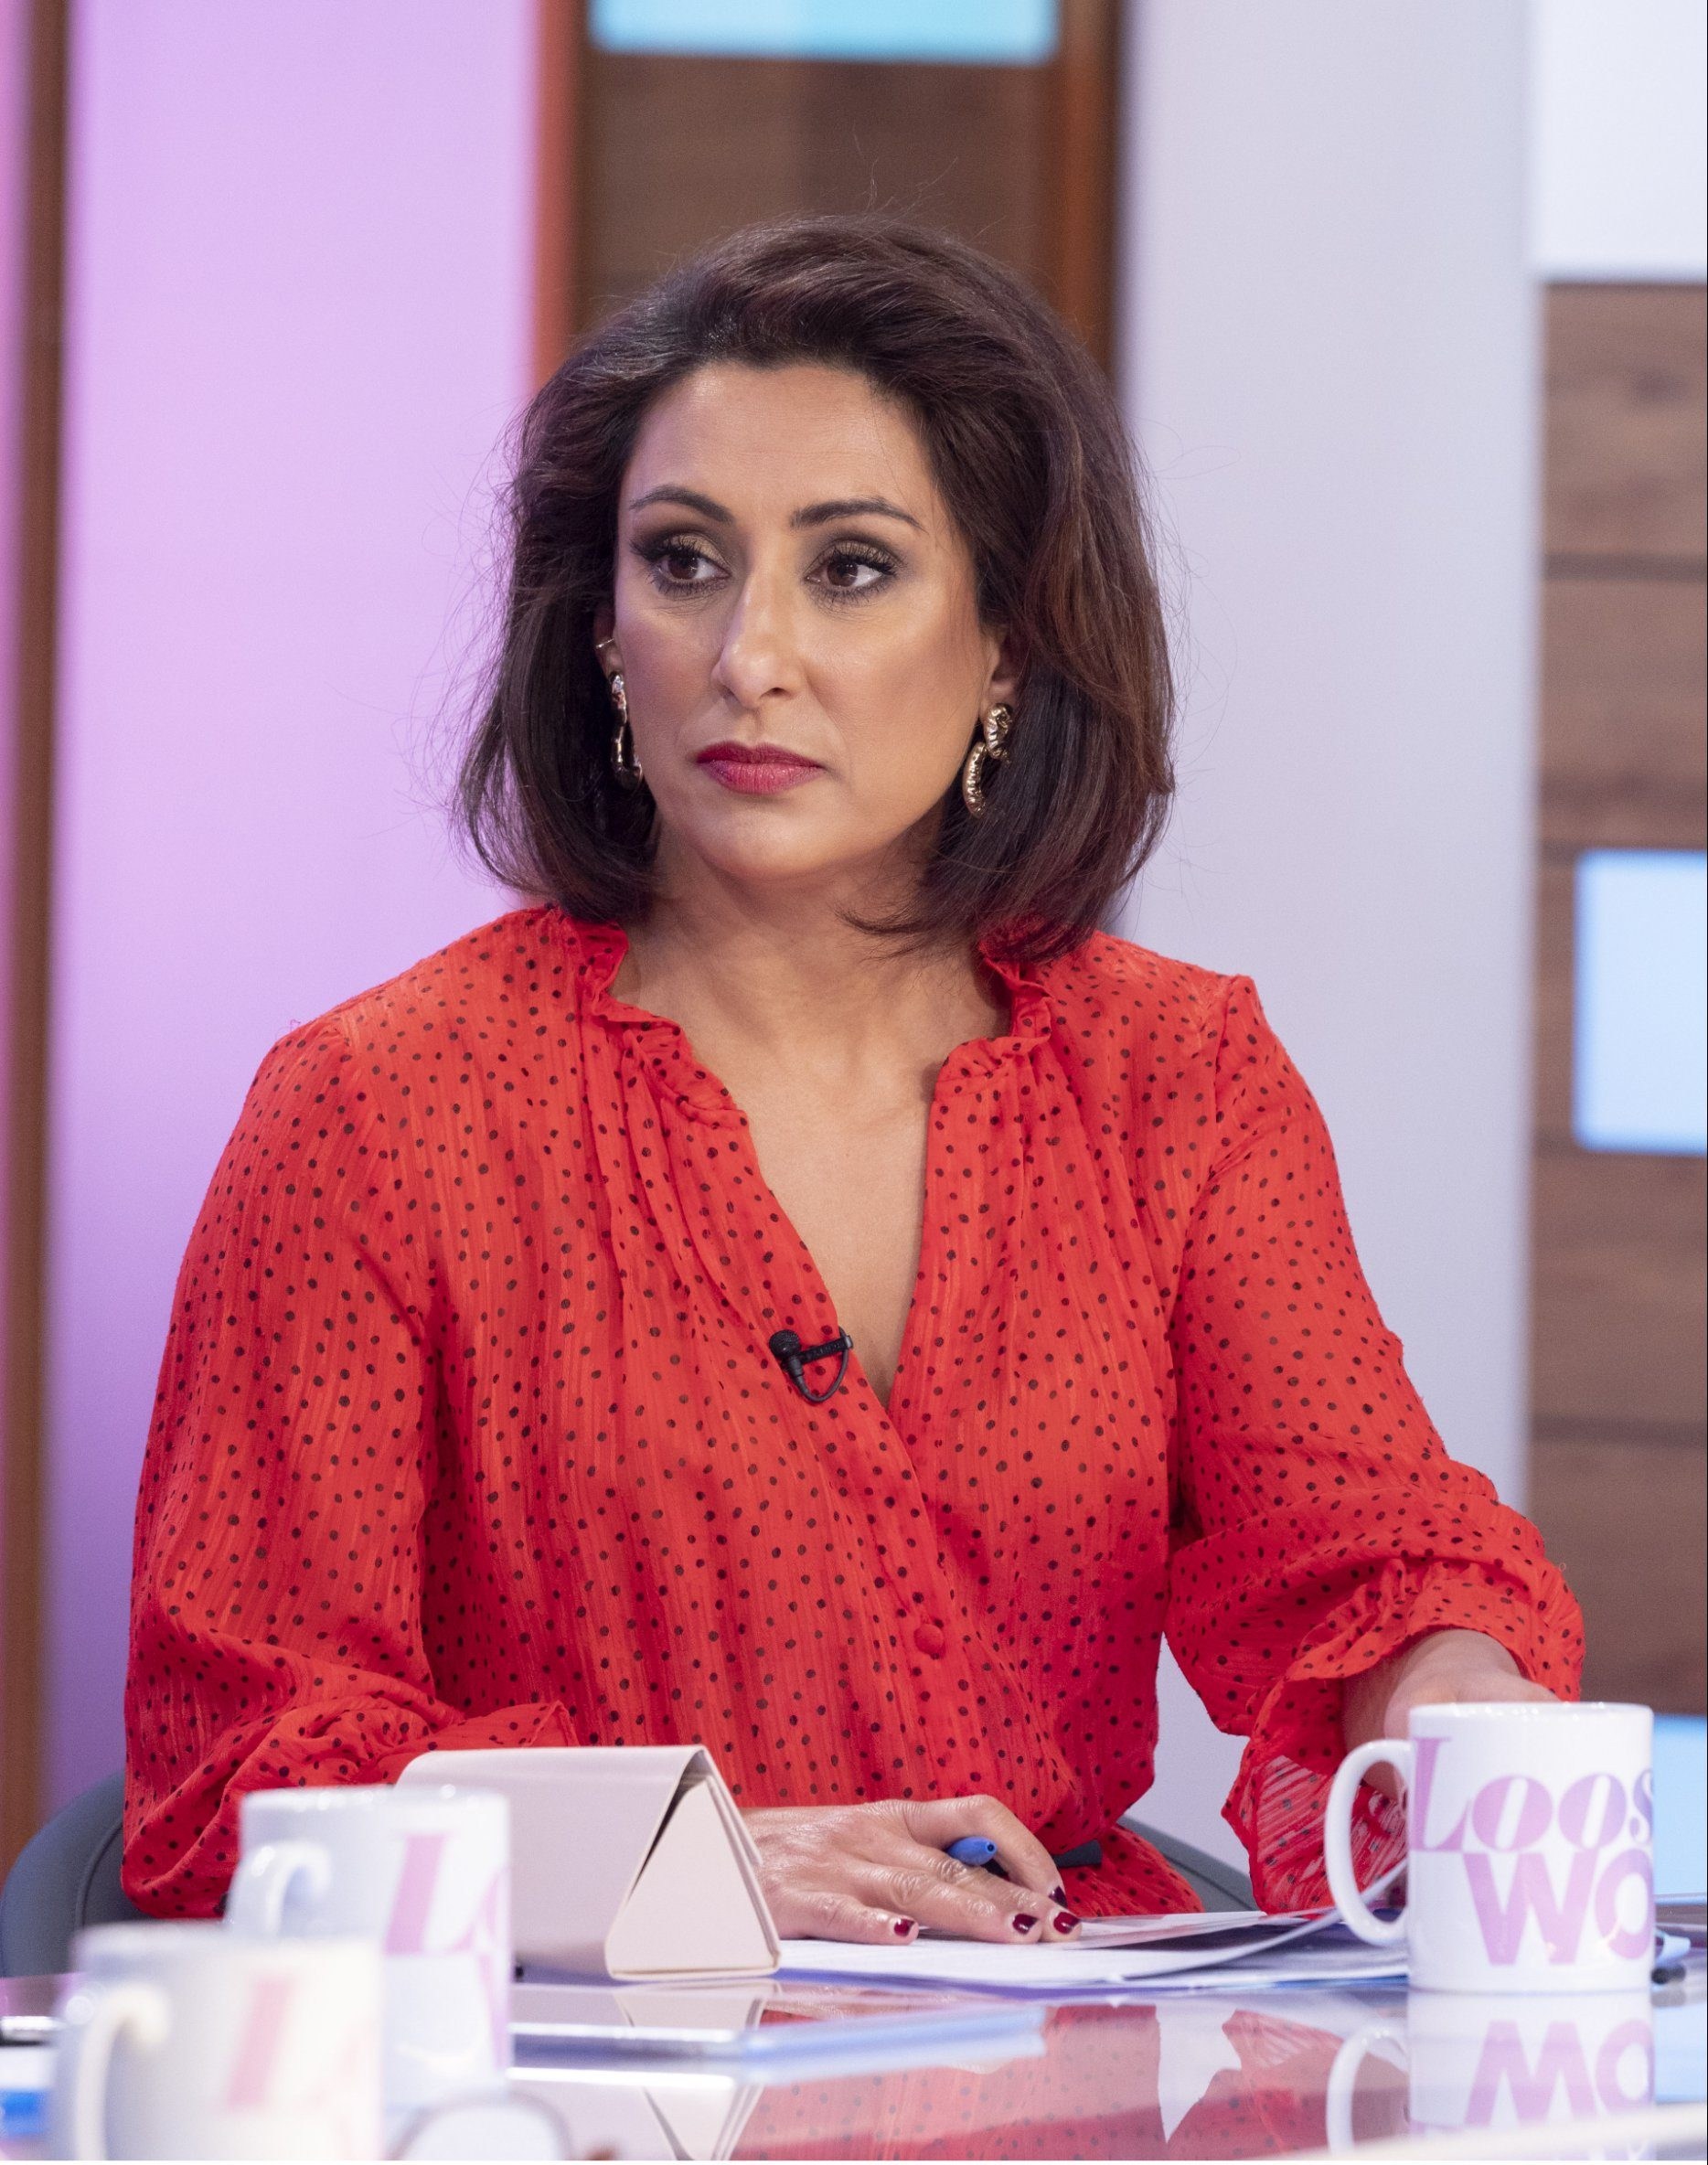 Saira Khan ‘tolerated’ some of her Loose Women co-stars before quitting show